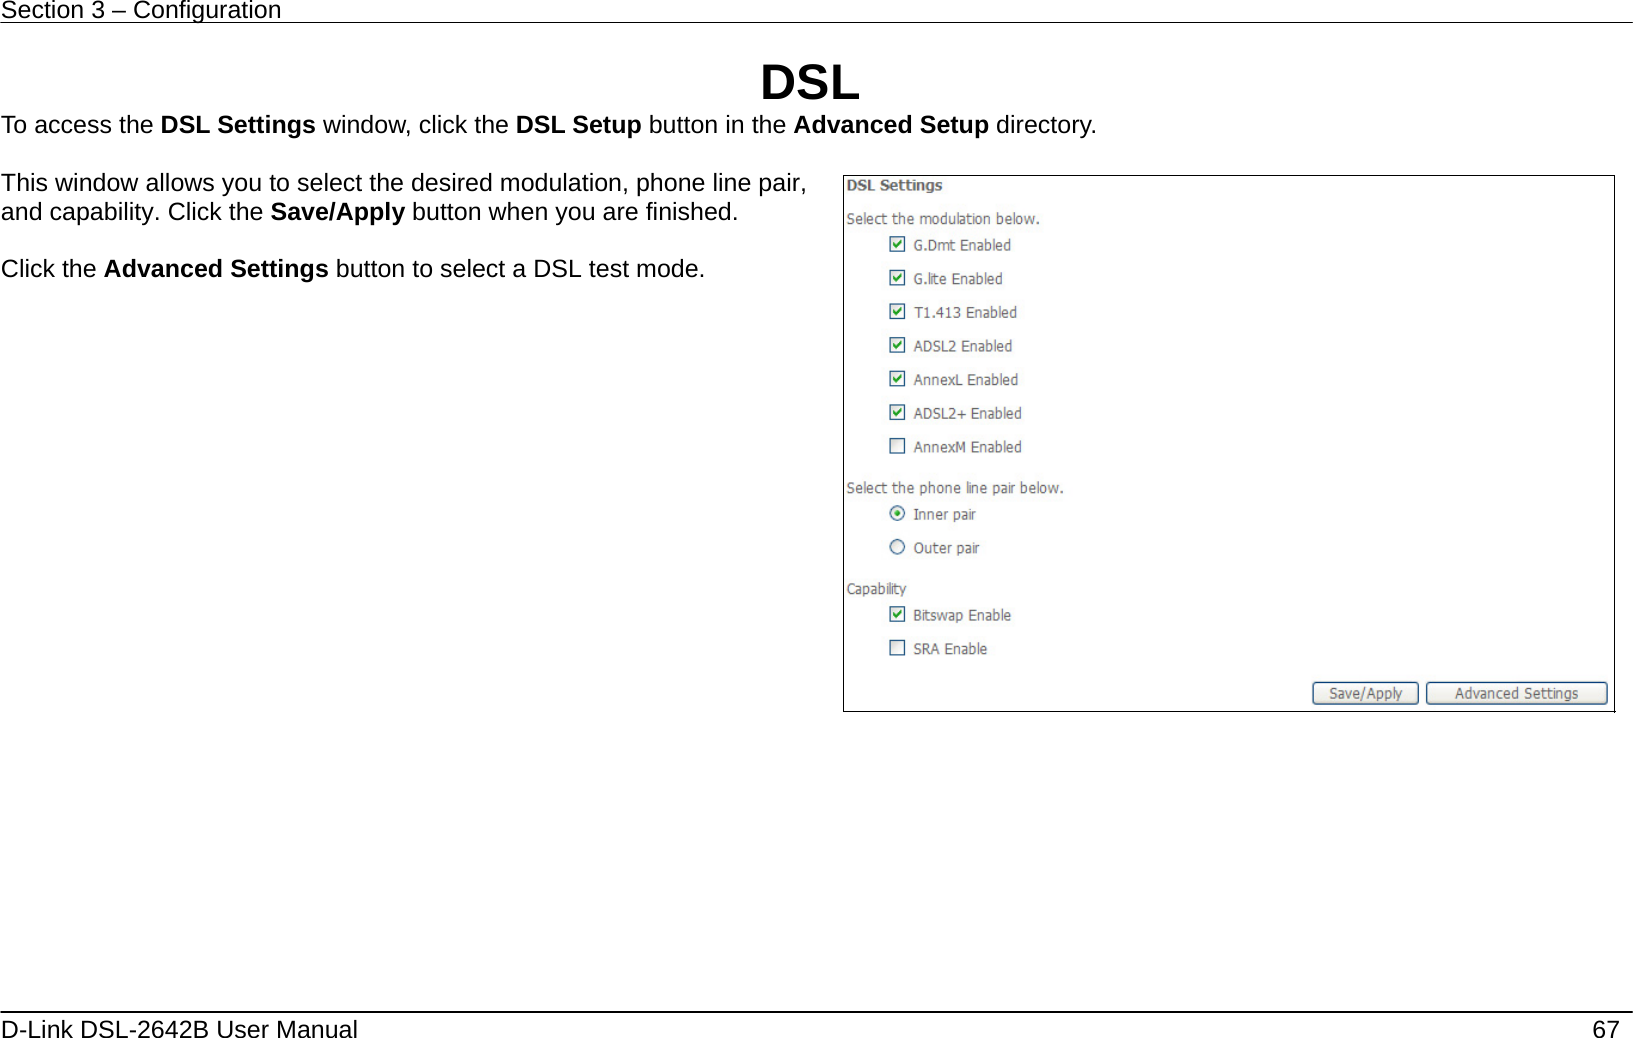 Section 3 – Configuration   D-Link DSL-2642B User Manual    67 DSL To access the DSL Settings window, click the DSL Setup button in the Advanced Setup directory.  This window allows you to select the desired modulation, phone line pair, and capability. Click the Save/Apply button when you are finished.  Click the Advanced Settings button to select a DSL test mode.       